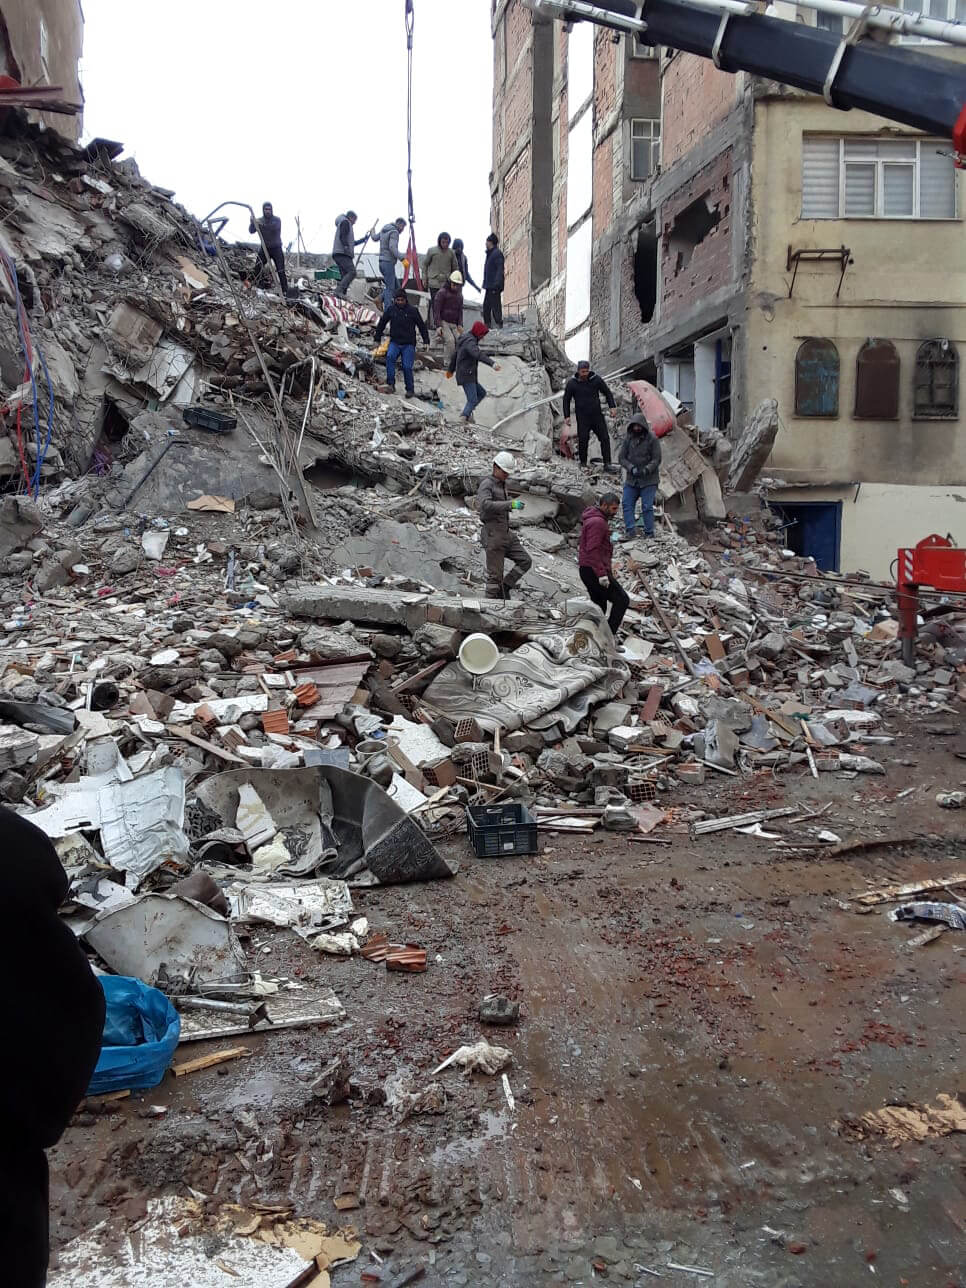 Scenes of destruction in Türkiye in the aftermath of the earthquakes.